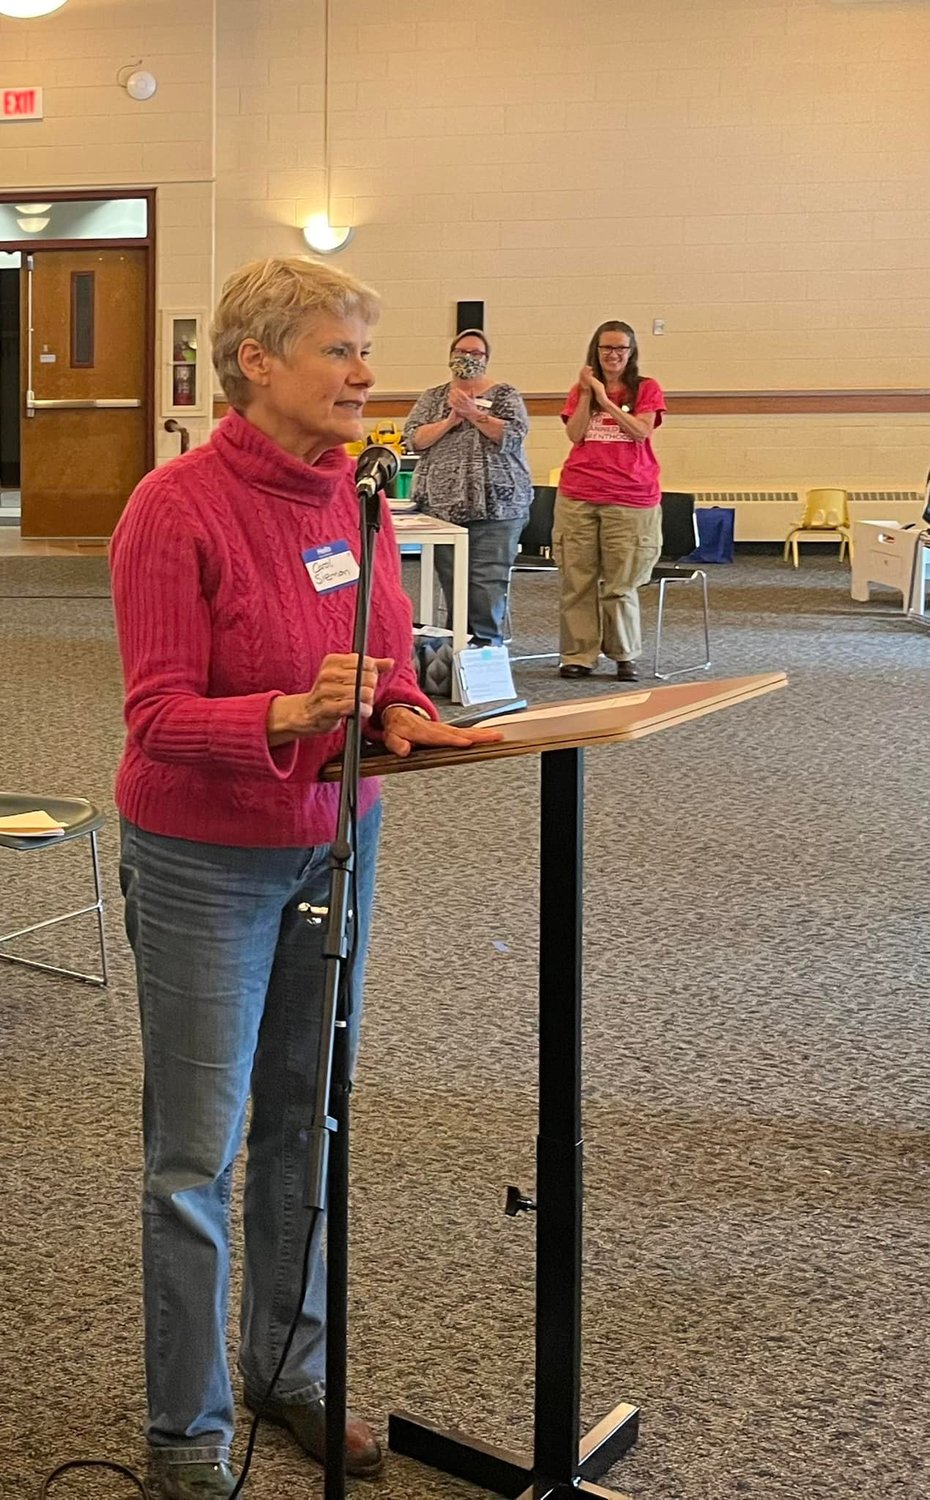 Ingham County Prosecutor Carol Siemon accepting the Peacemaker of the Year Award last week from the Peace Education Center.